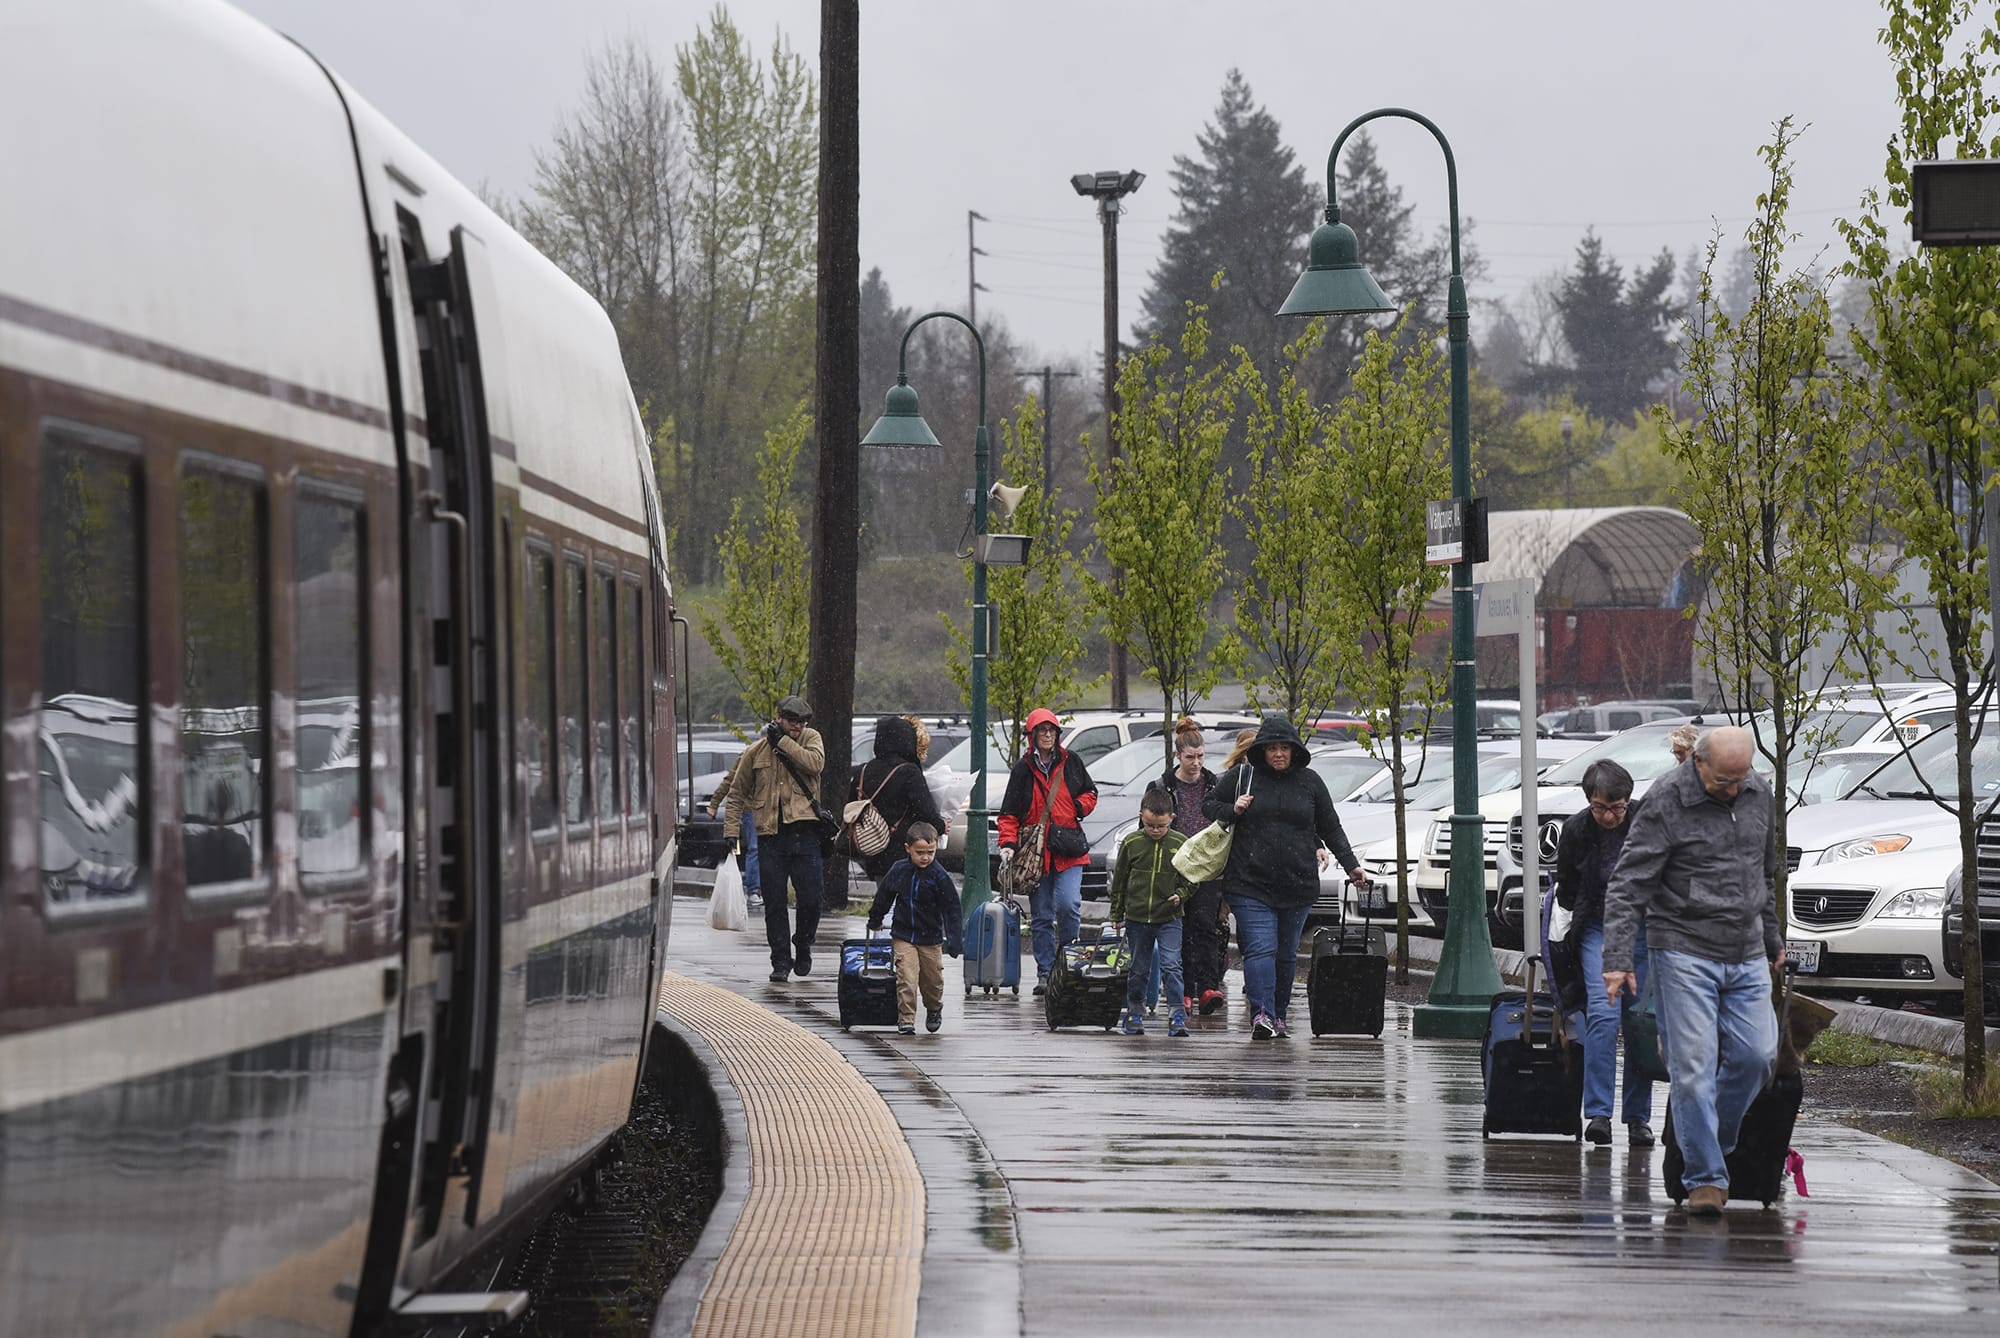 Passengers exit an Amtrak train at the Amtrak Train Station in Vancouver, Thursday afternoon, April 5, 2018.